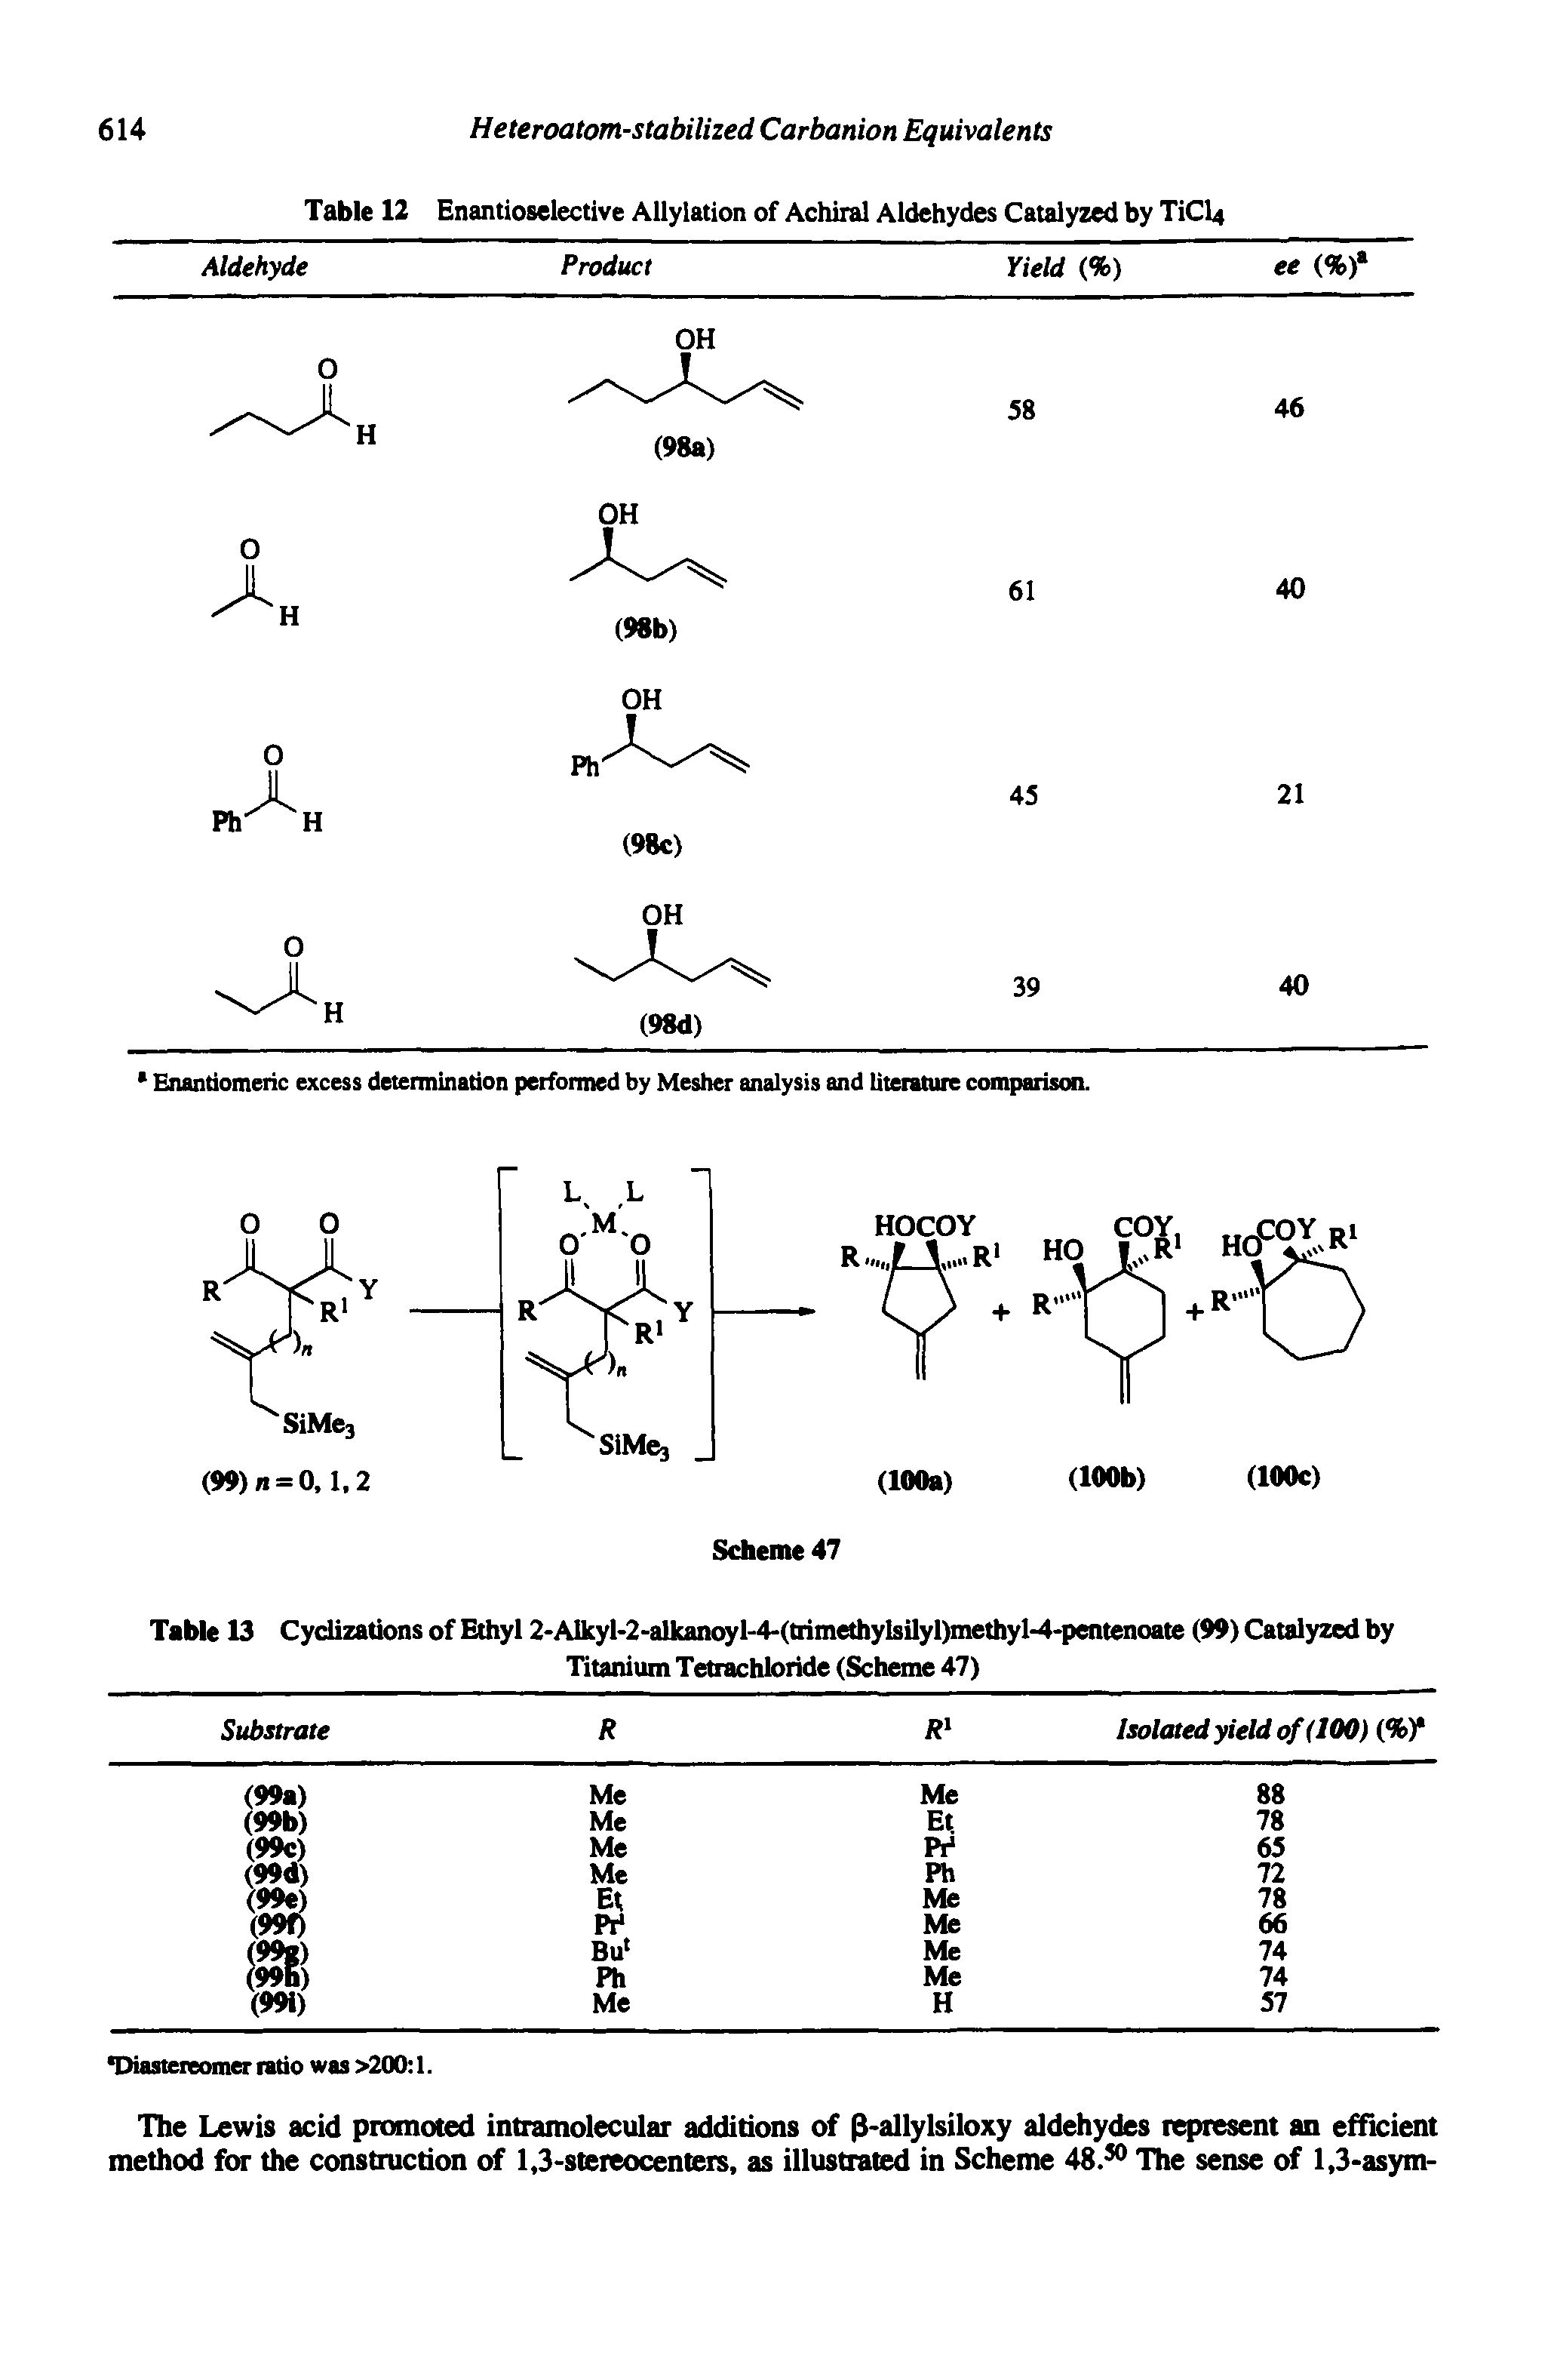 Table 12 Enantioselective Allylation of Achiral Aldehydes Catalyzed by TiCl4...